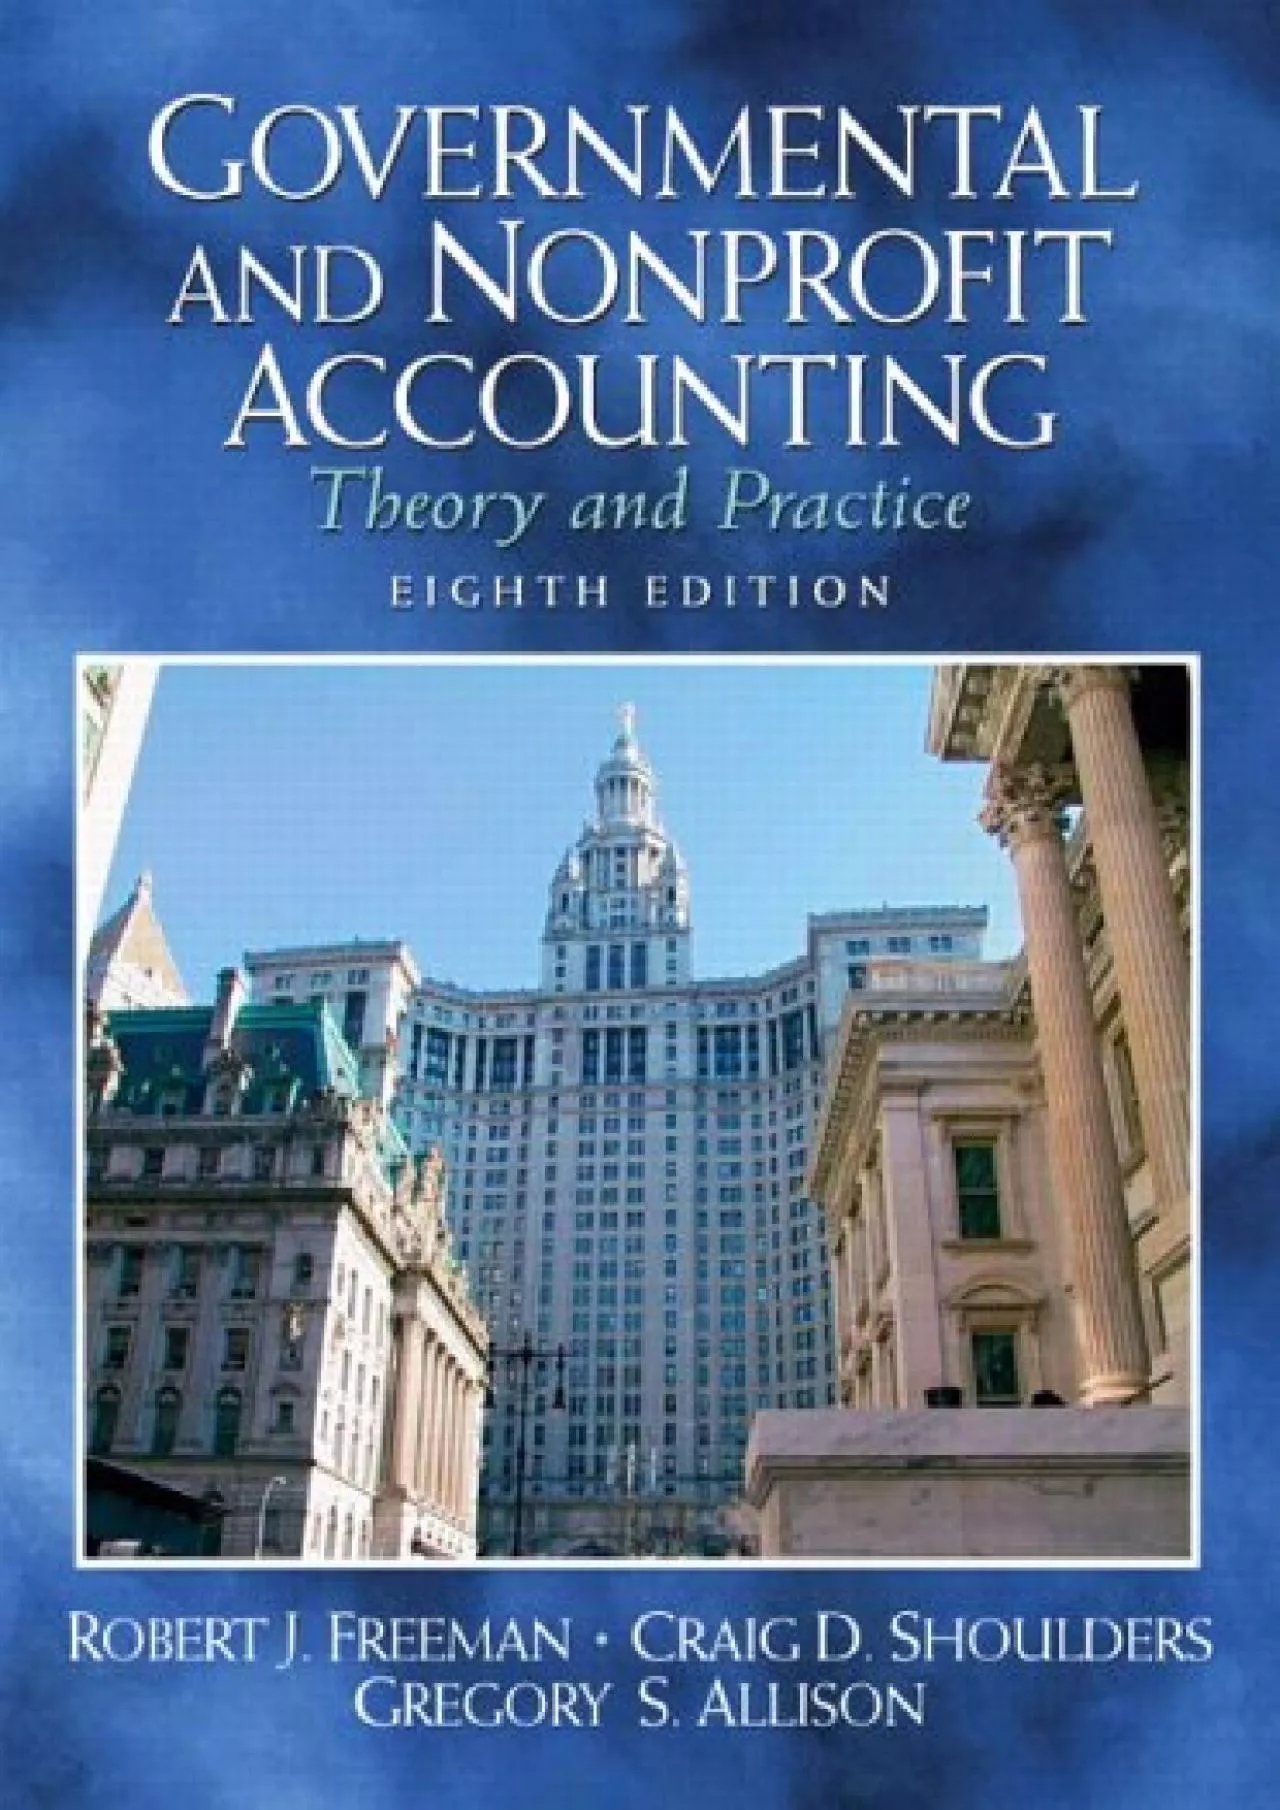 Governmental And Nonprofit Accounting: Theory And Practice (CHARLES T HORNGREN SERIES